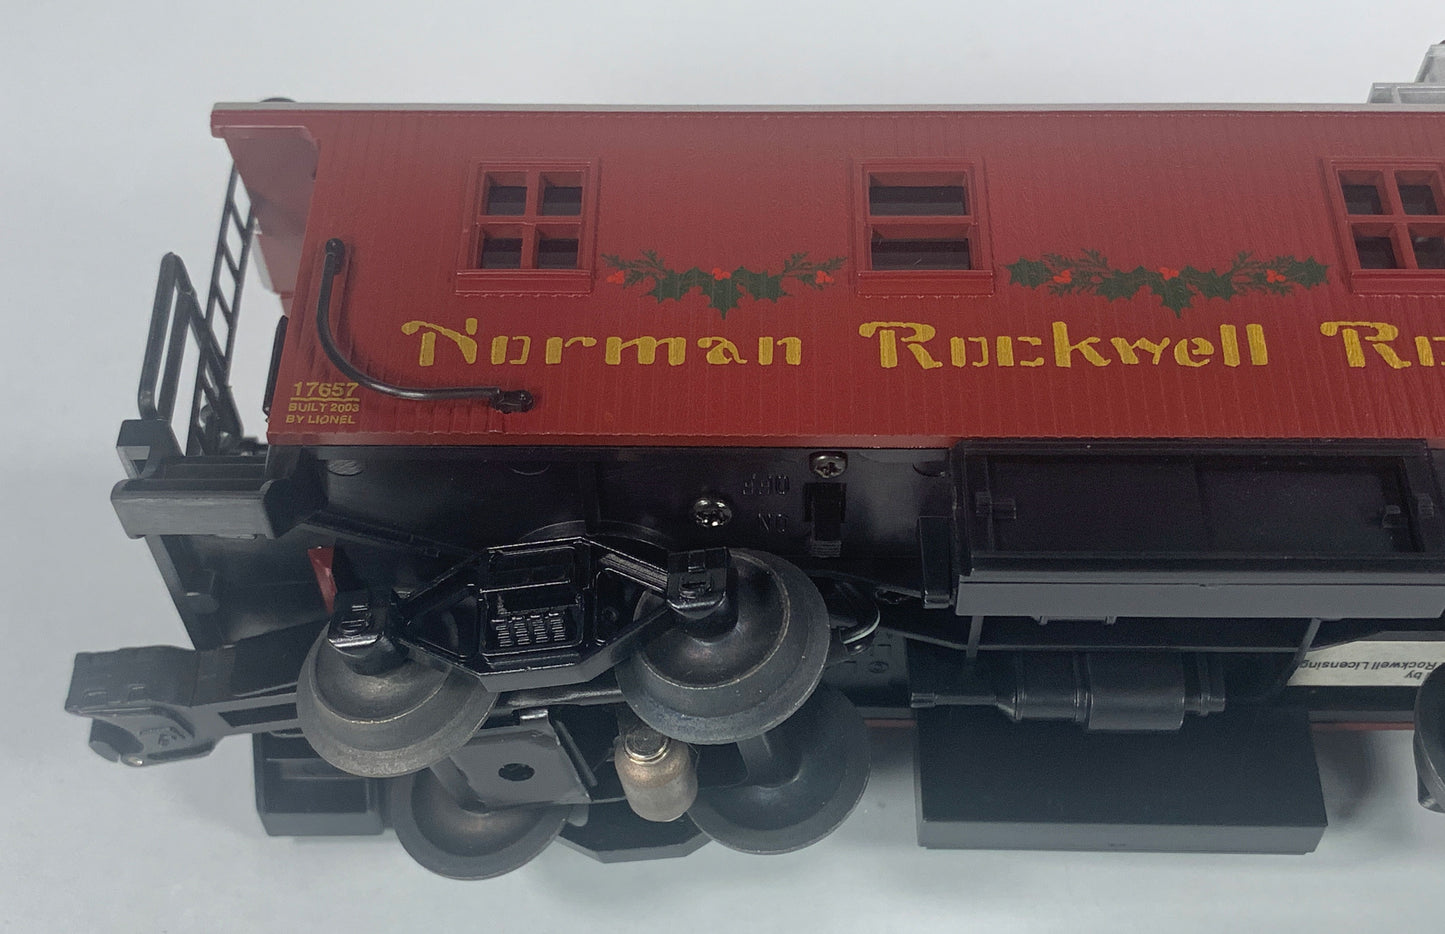 LIONEL • STD O GAUGE • 2003 Norman Rockwell Illuminated Caboose 6-17657 • NEW OLD STOCK